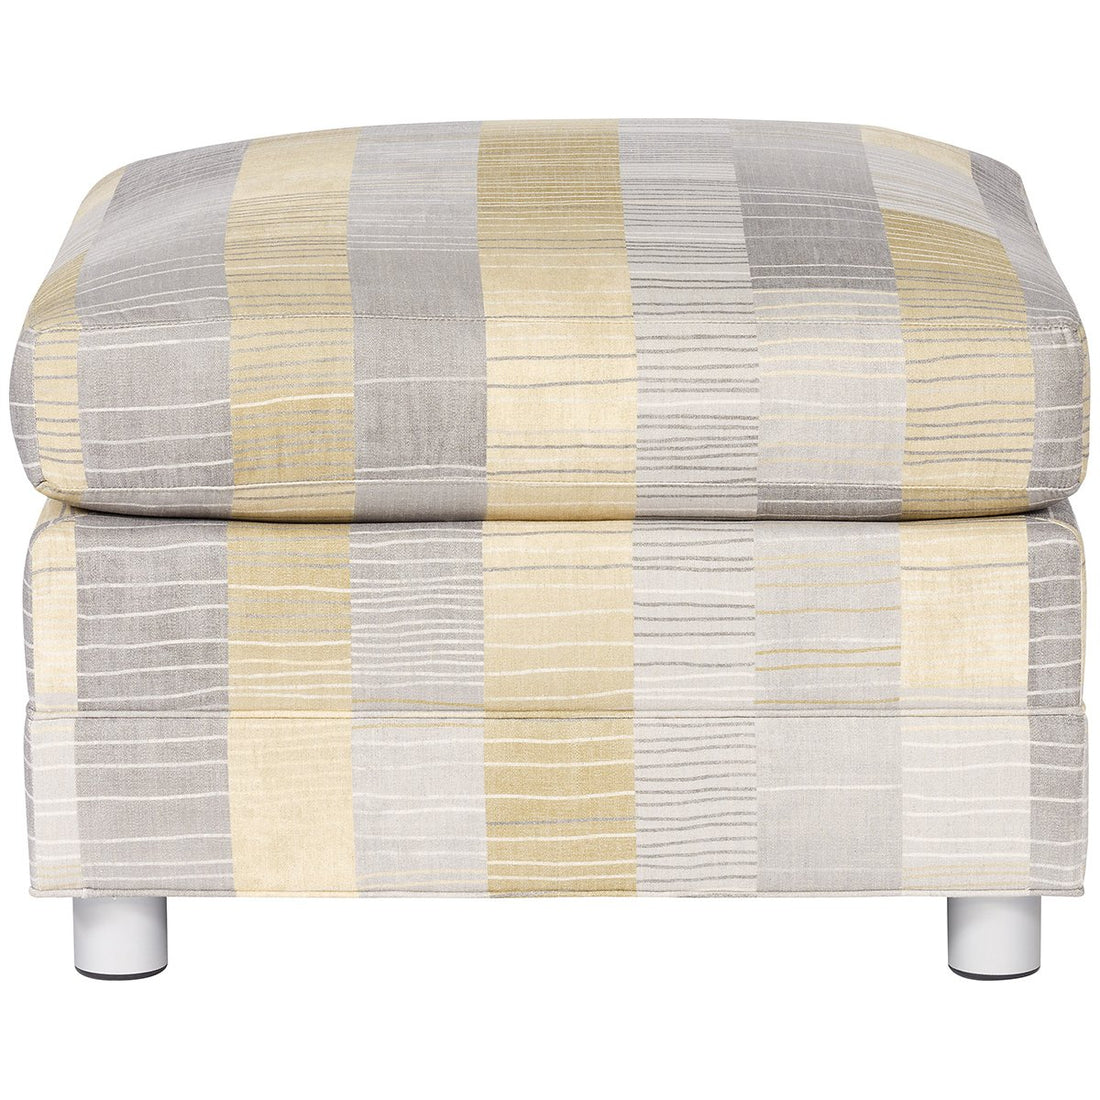 Vanguard Furniture Connelly Springs Bumper Ottomans